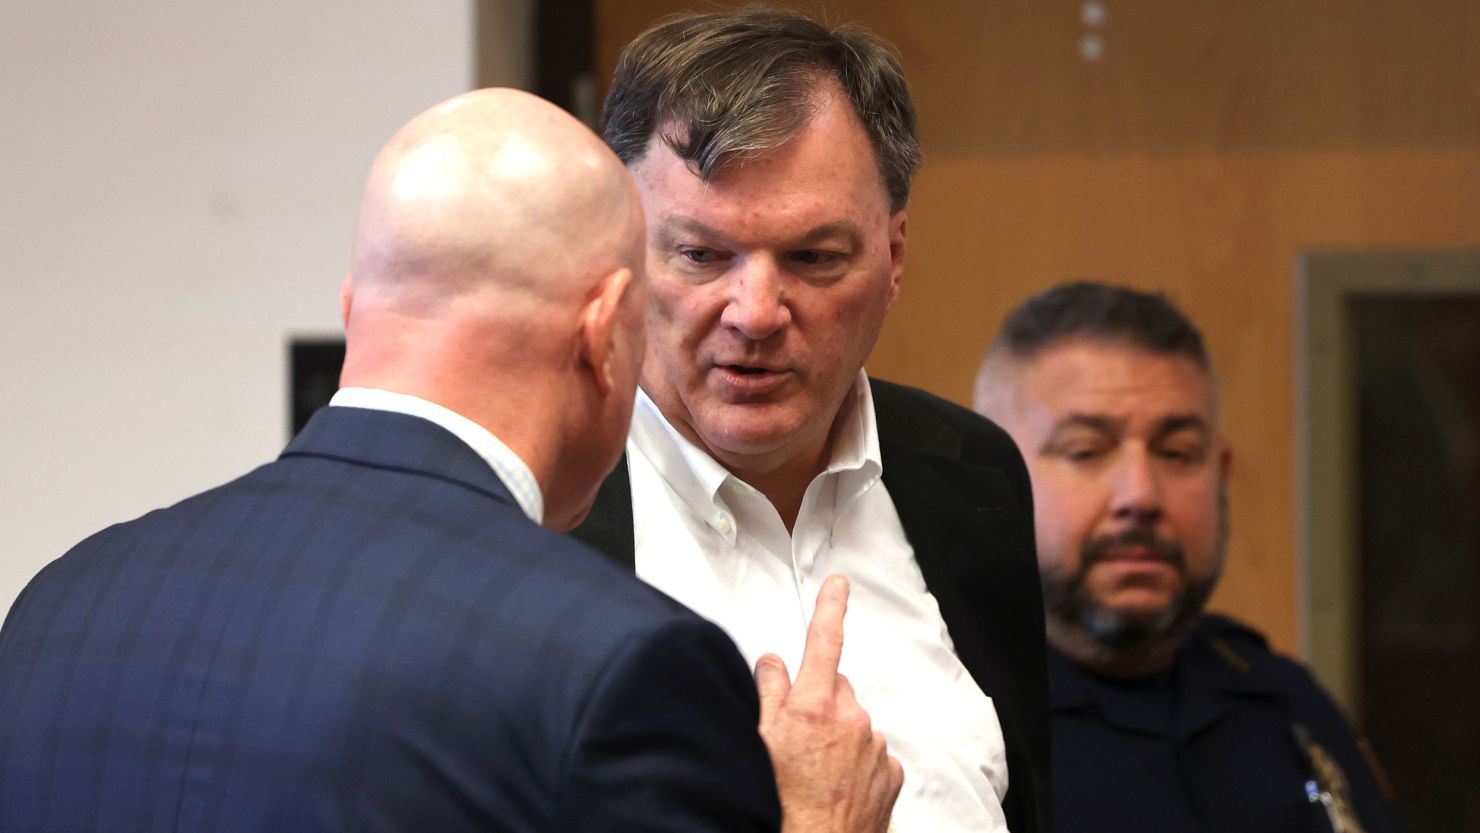 Rex Heuermann appears with his lawyer Michael Brown, left, at Suffolk County Court in Riverhead, New York, on Wednesday.